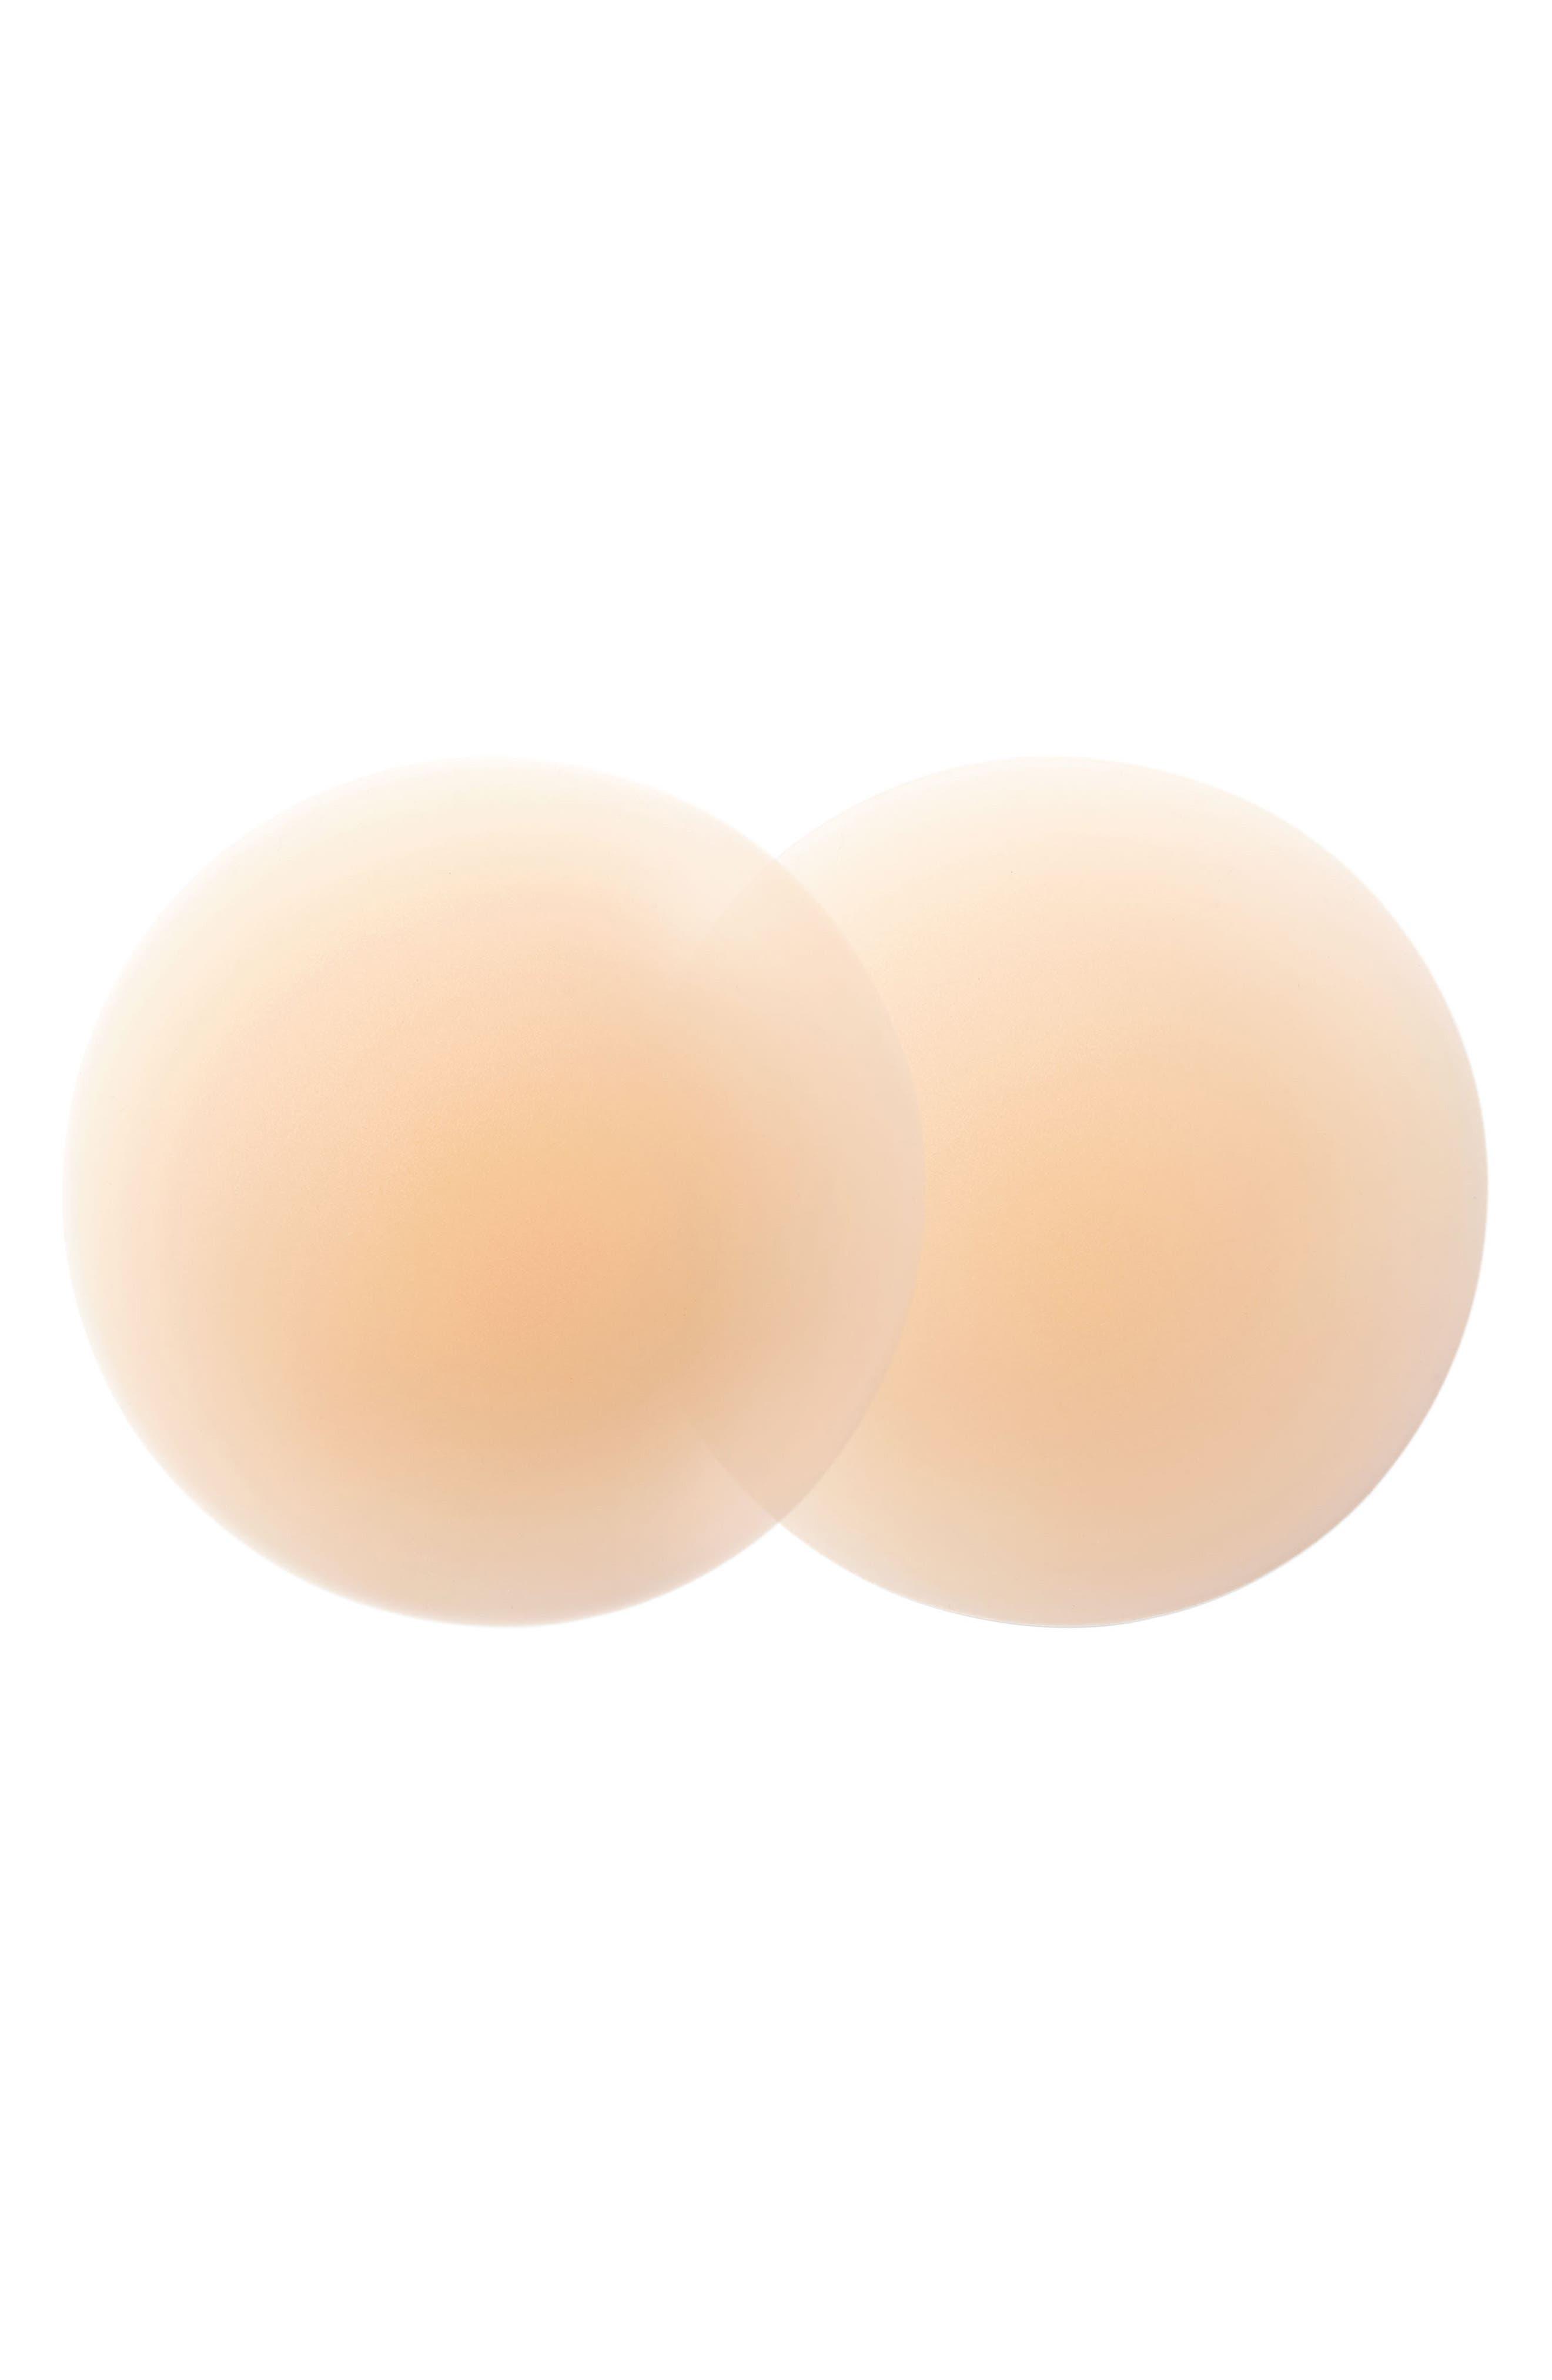 Bristols 6 Nippies By Bristols Six Skin Reusable Adhesive Nipple Covers in  Natural